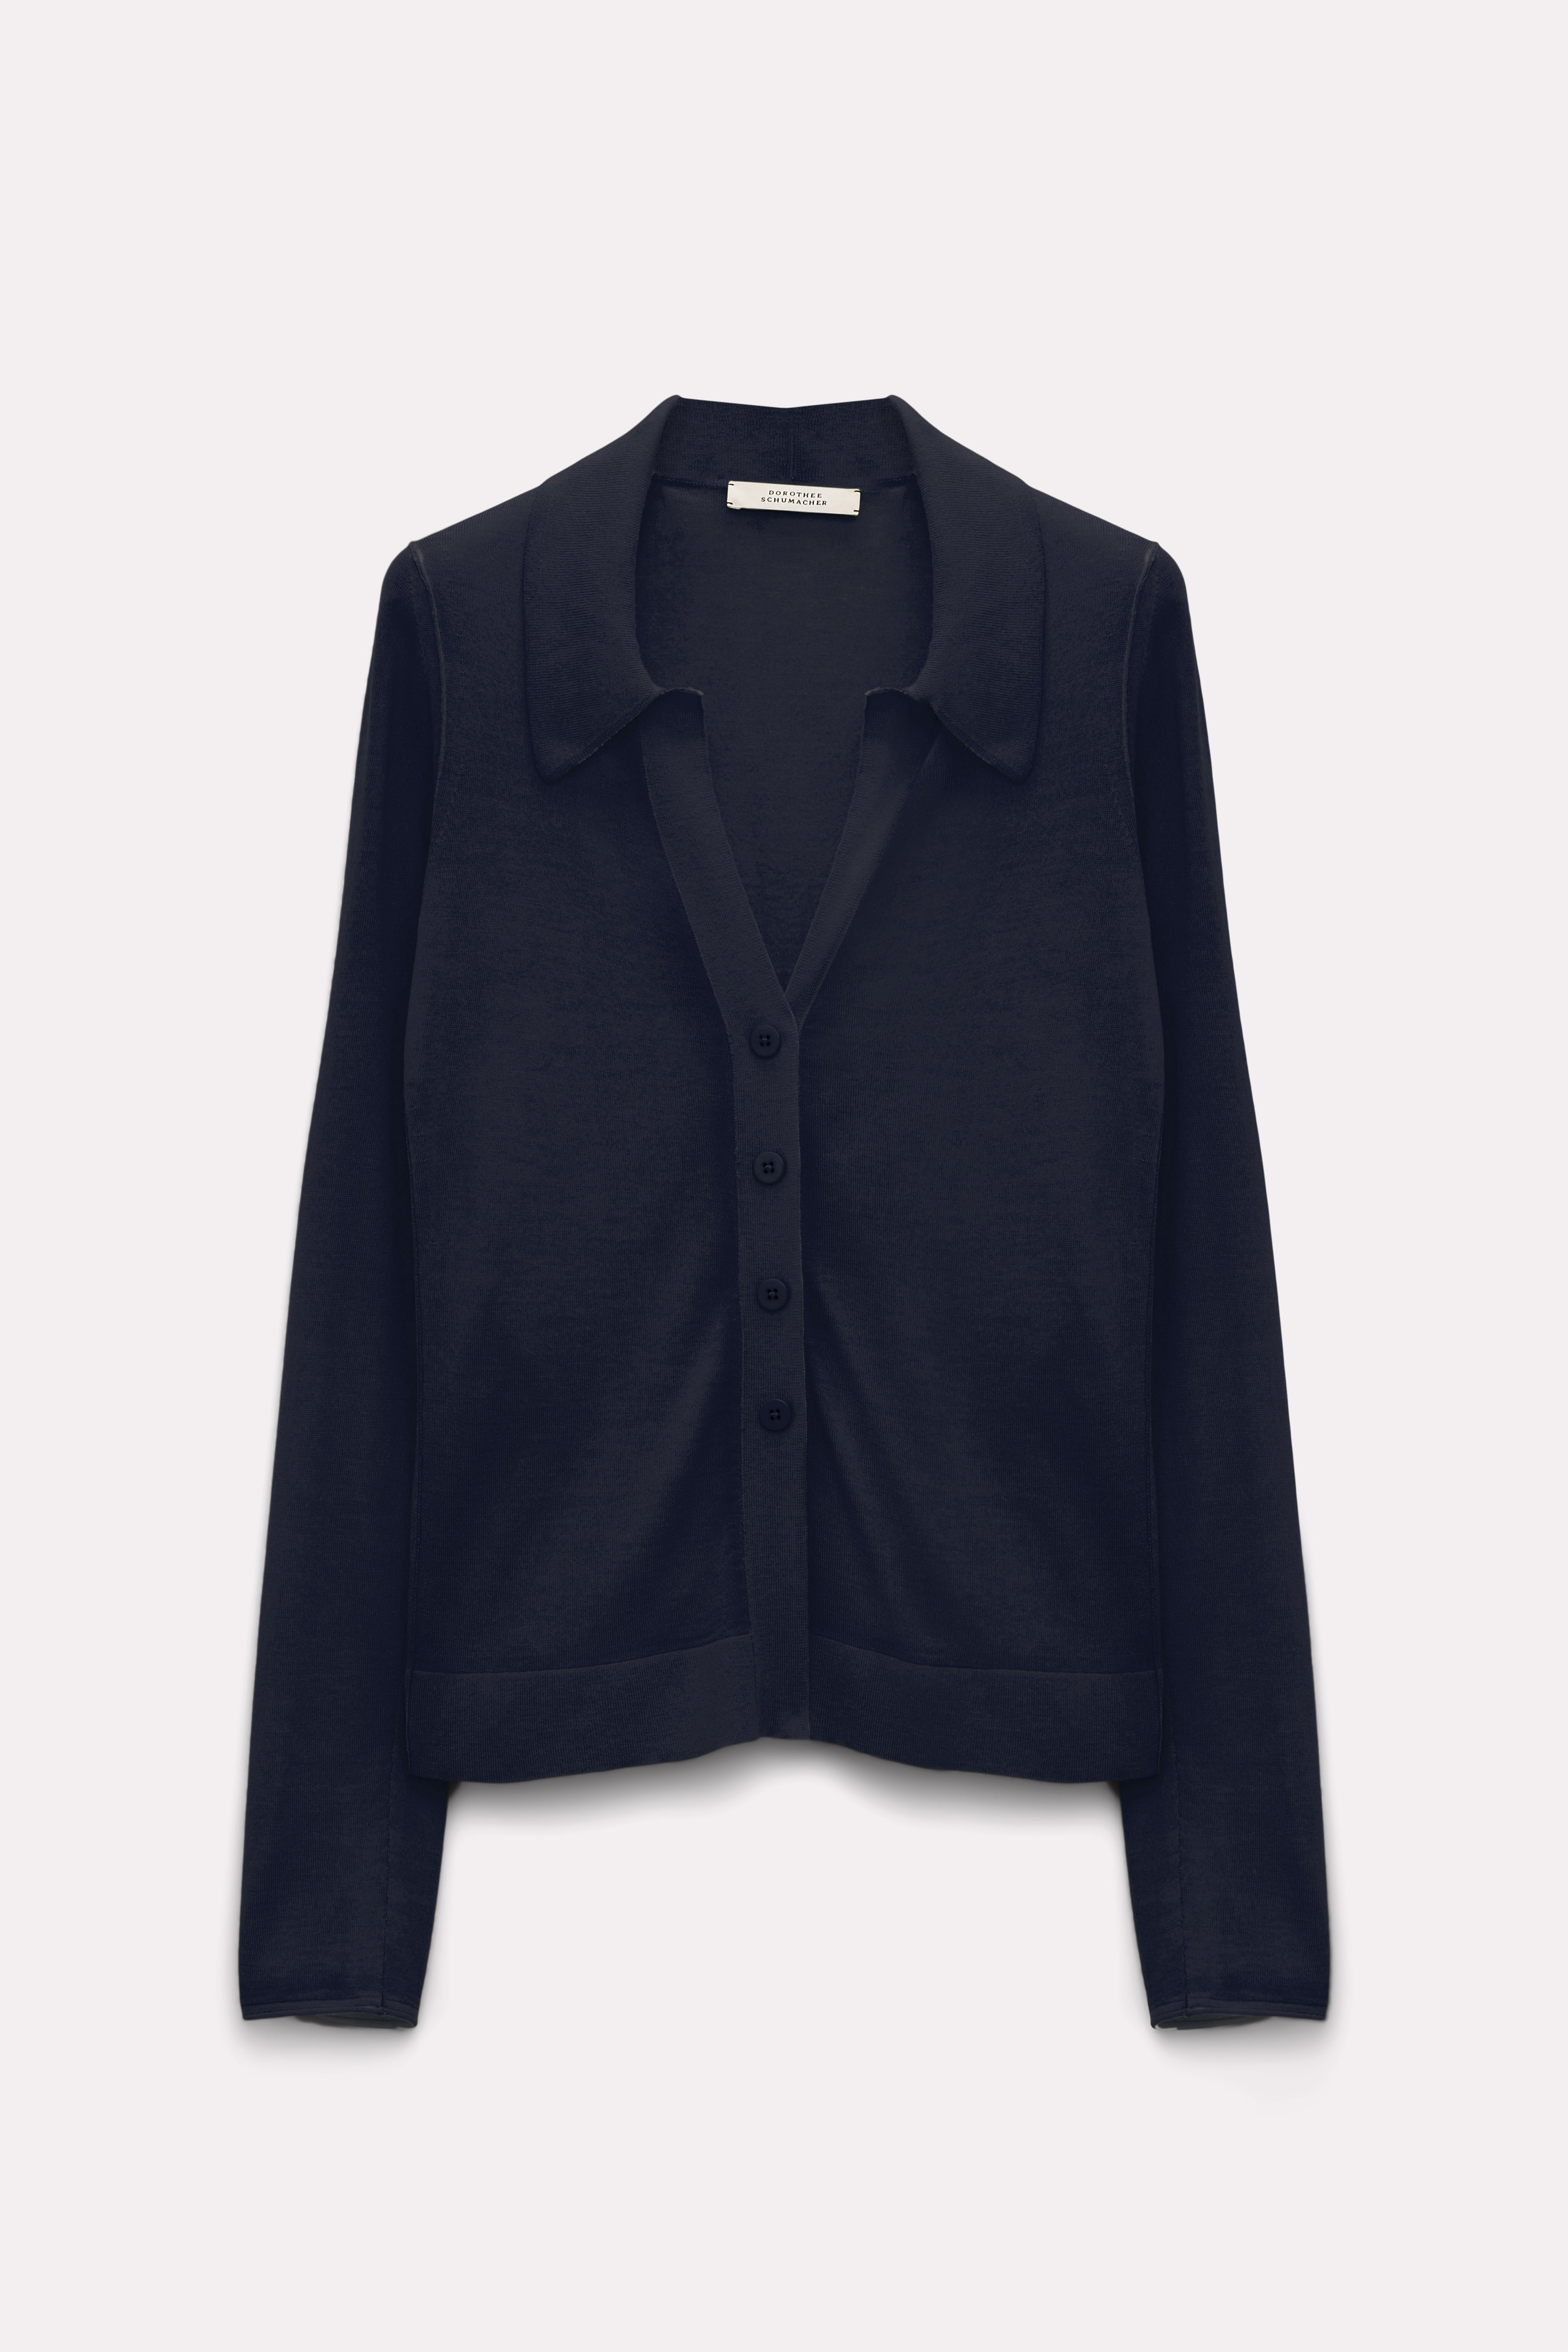 Dorothee-Schumacher-OUTLET-SALE-ESSENTIAL-TWIST-cardigan-Strick-ARCHIVE-COLLECTION_175b3018-824a-4cf8-98cb-890739bf6d99.jpg